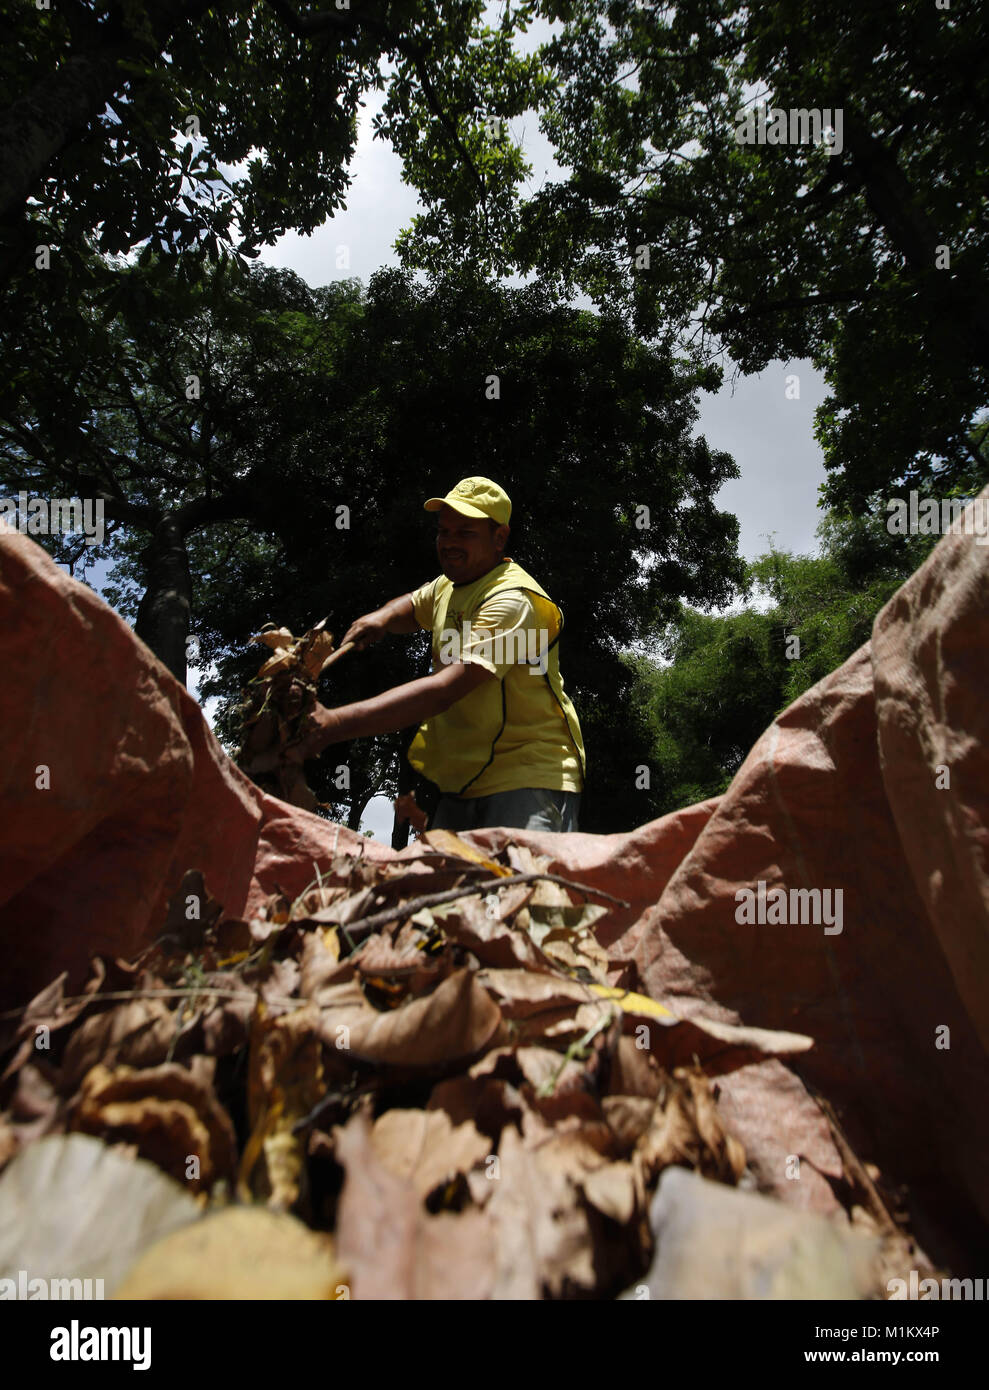 Valencia, Carabobo, Venezuela. 23rd May, 2012. June 04, 2012An employee collects the dry leaves to make the compost in the Fernando Pe''“alver park. They do not use chemicals and last year they contributed 9 thousand plants for a reforestation campaign of Fernando Pe''“alver Park, Fernando Pe''“alver Park, founded in 1983, has 22 hectares for environmental recreation that promote the relationship between man and nature, is crossed by the river Cabriales, there are diverse ecosystems, and there is a great variety of flora and fauna species. The park depends on the state government of Carabobo, Stock Photo